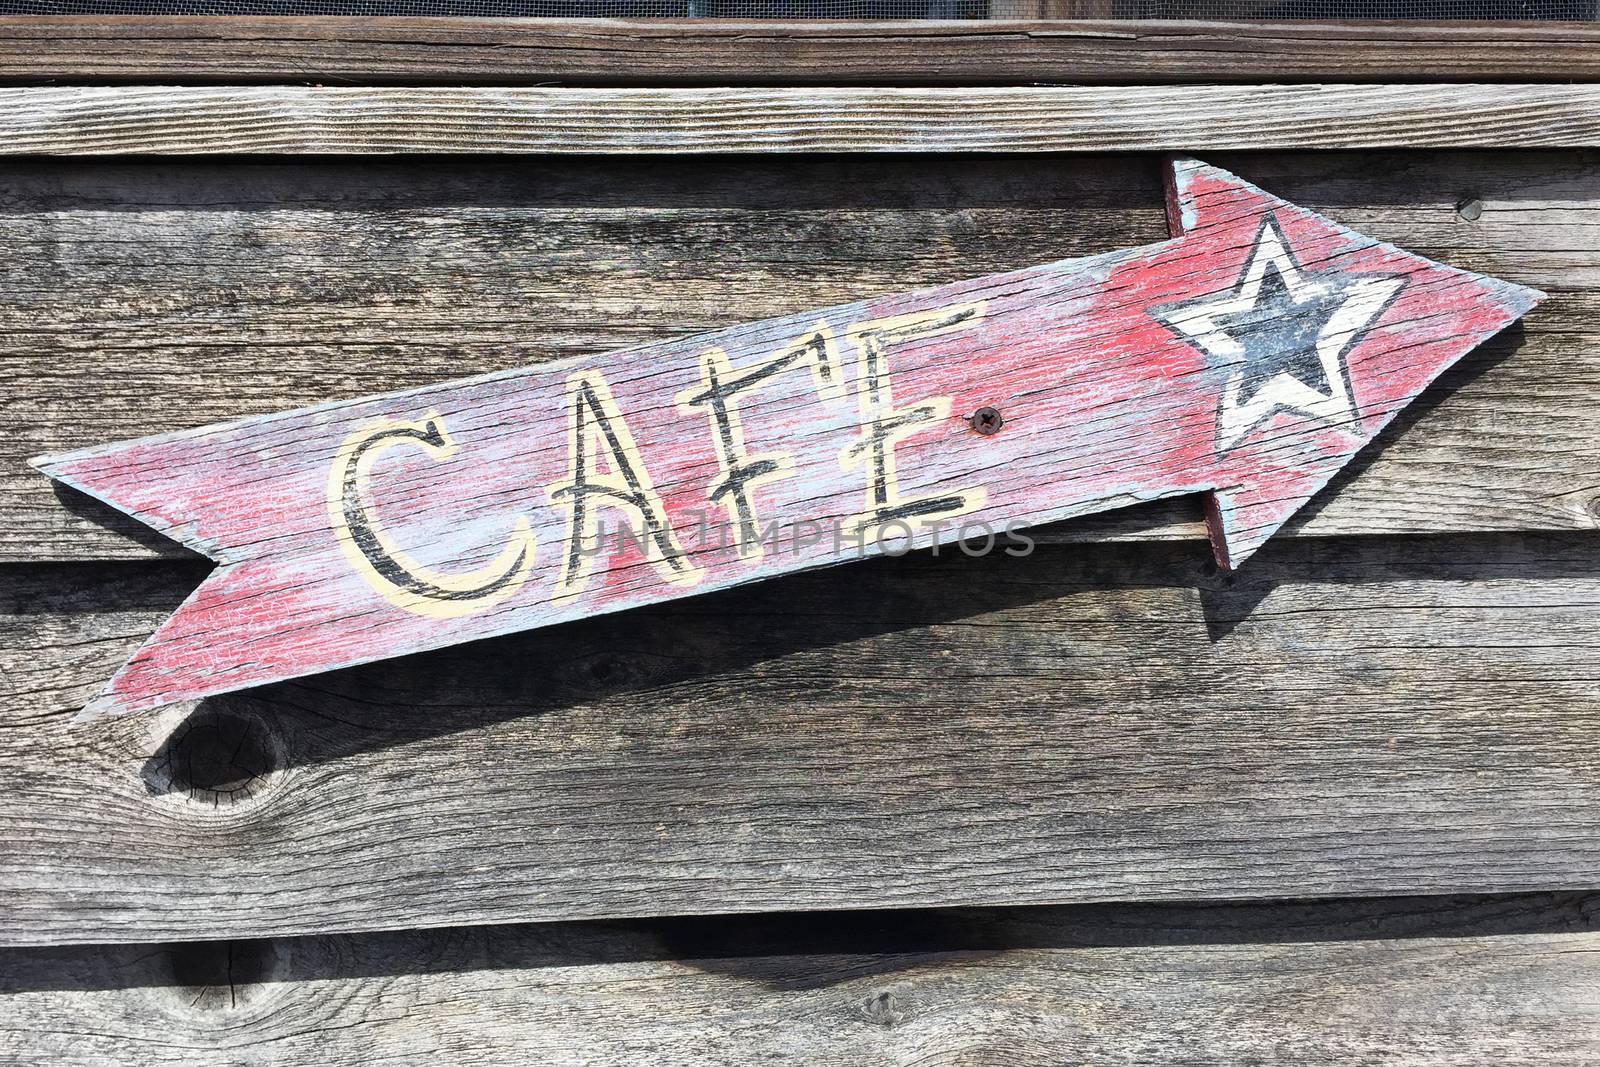 Café sign made out of old wood by jimmartin